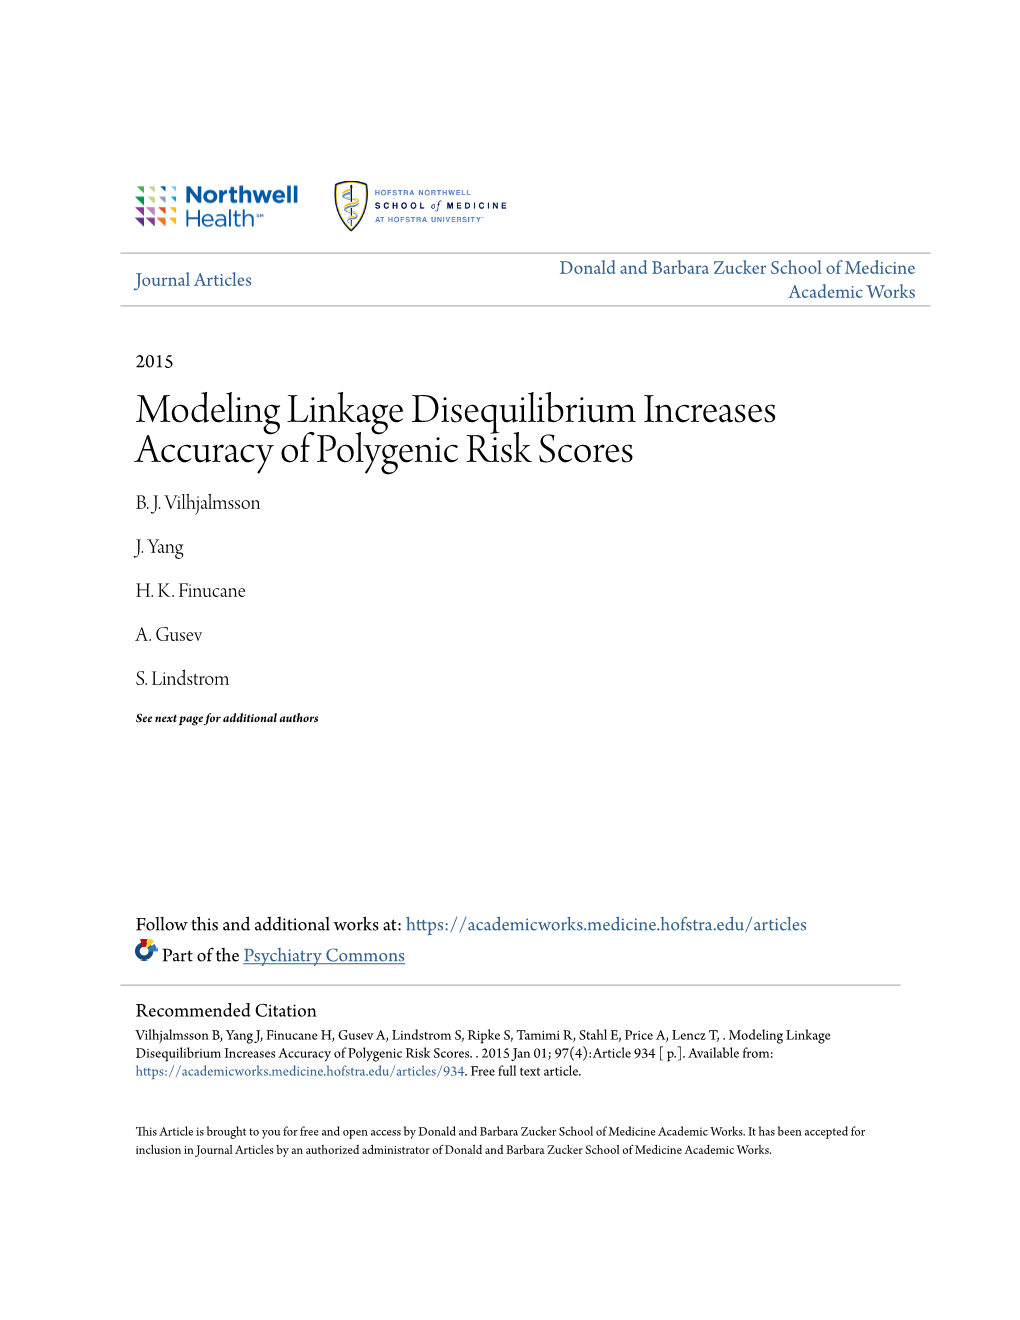 Modeling Linkage Disequilibrium Increases Accuracy of Polygenic Risk Scores B